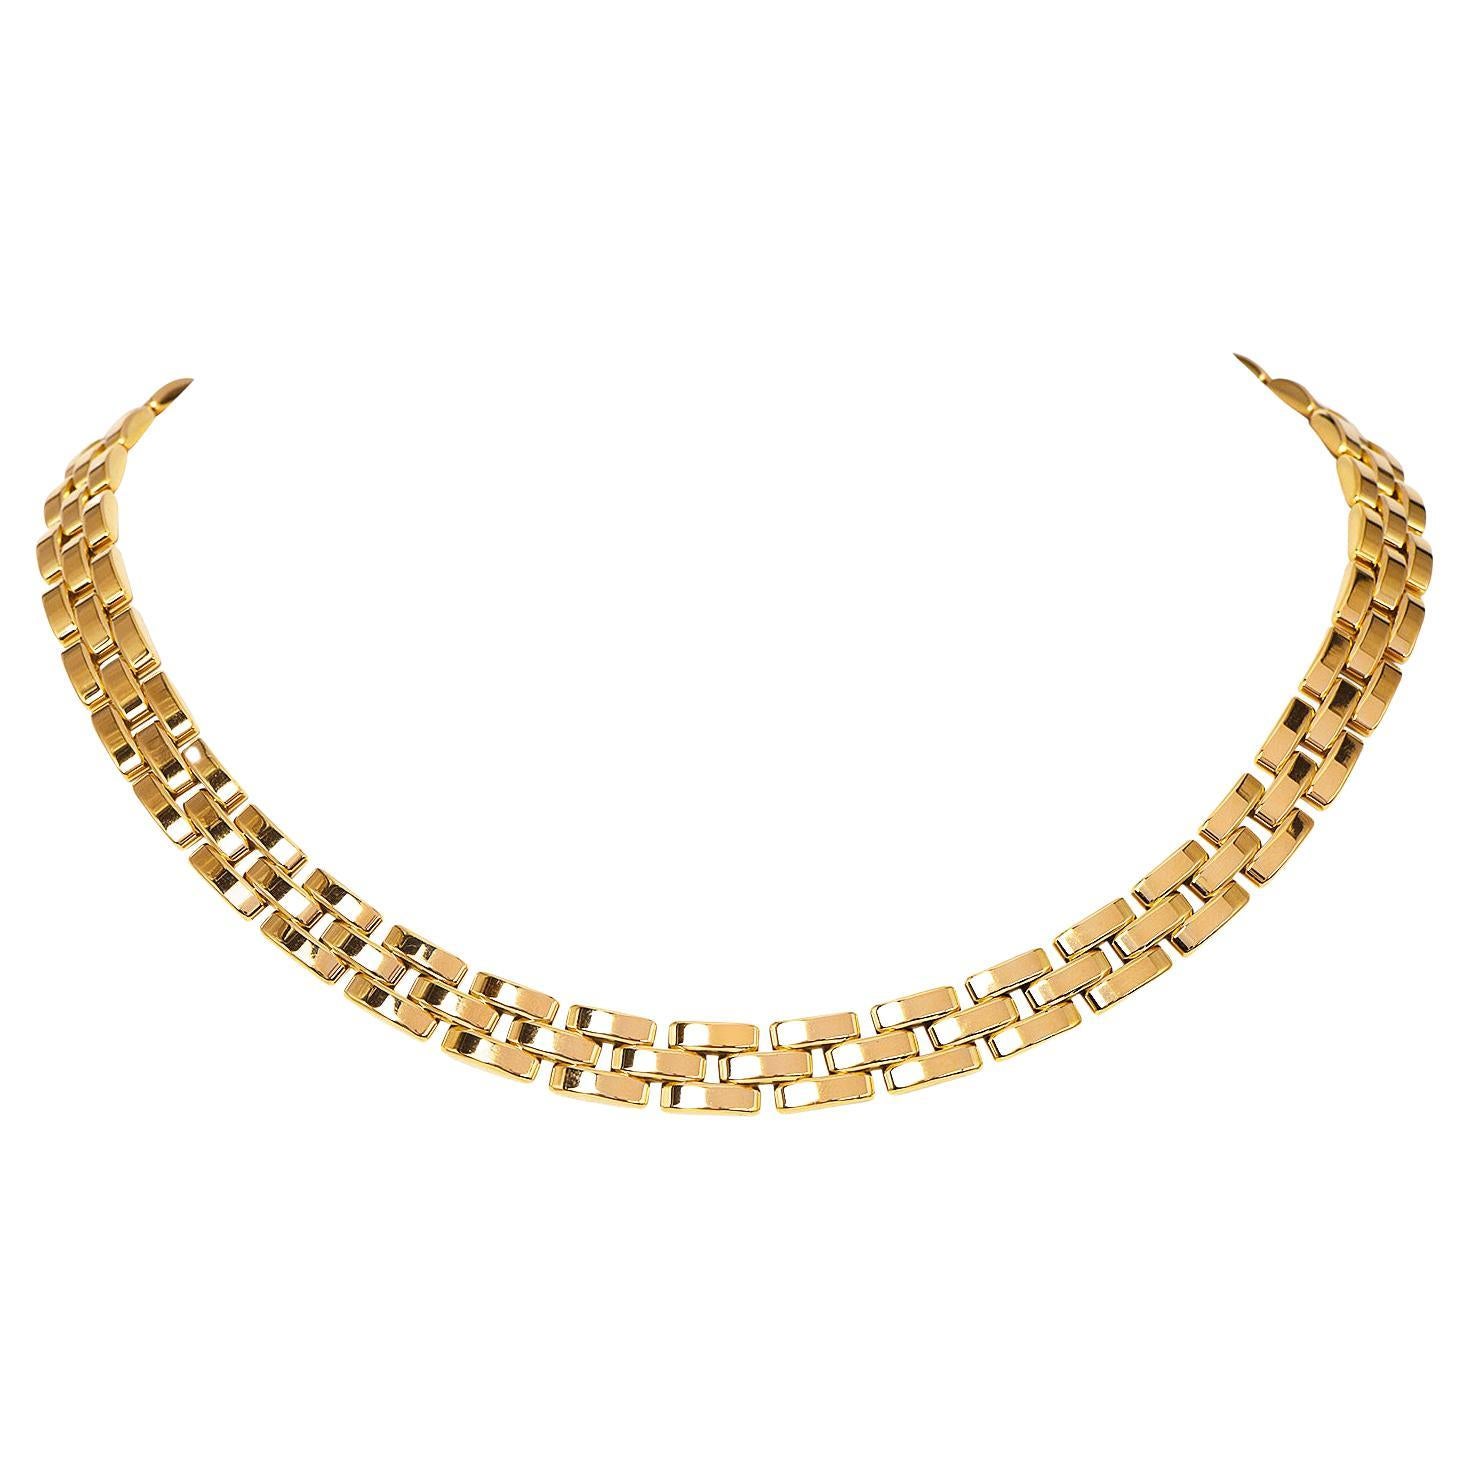 Cartier Maillon Panthere 18K Yellow Gold 3 Row Link Necklace